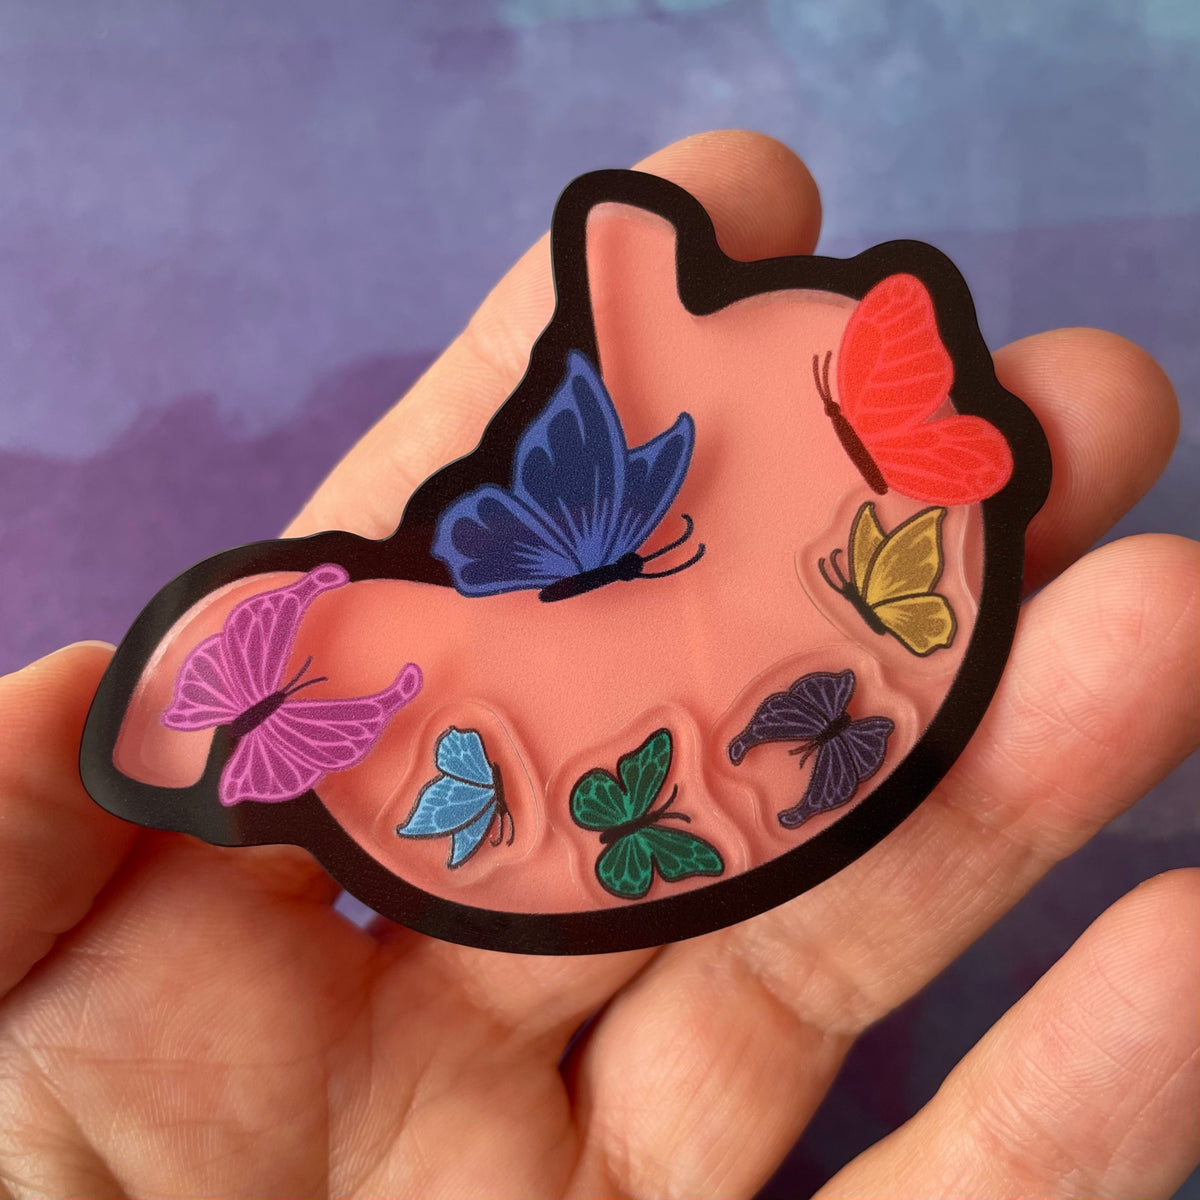 Butterflies in My Stomach - Shaker Swappable Badge Reel Design Top - Rad Girl Creations - Medical Badge Reel